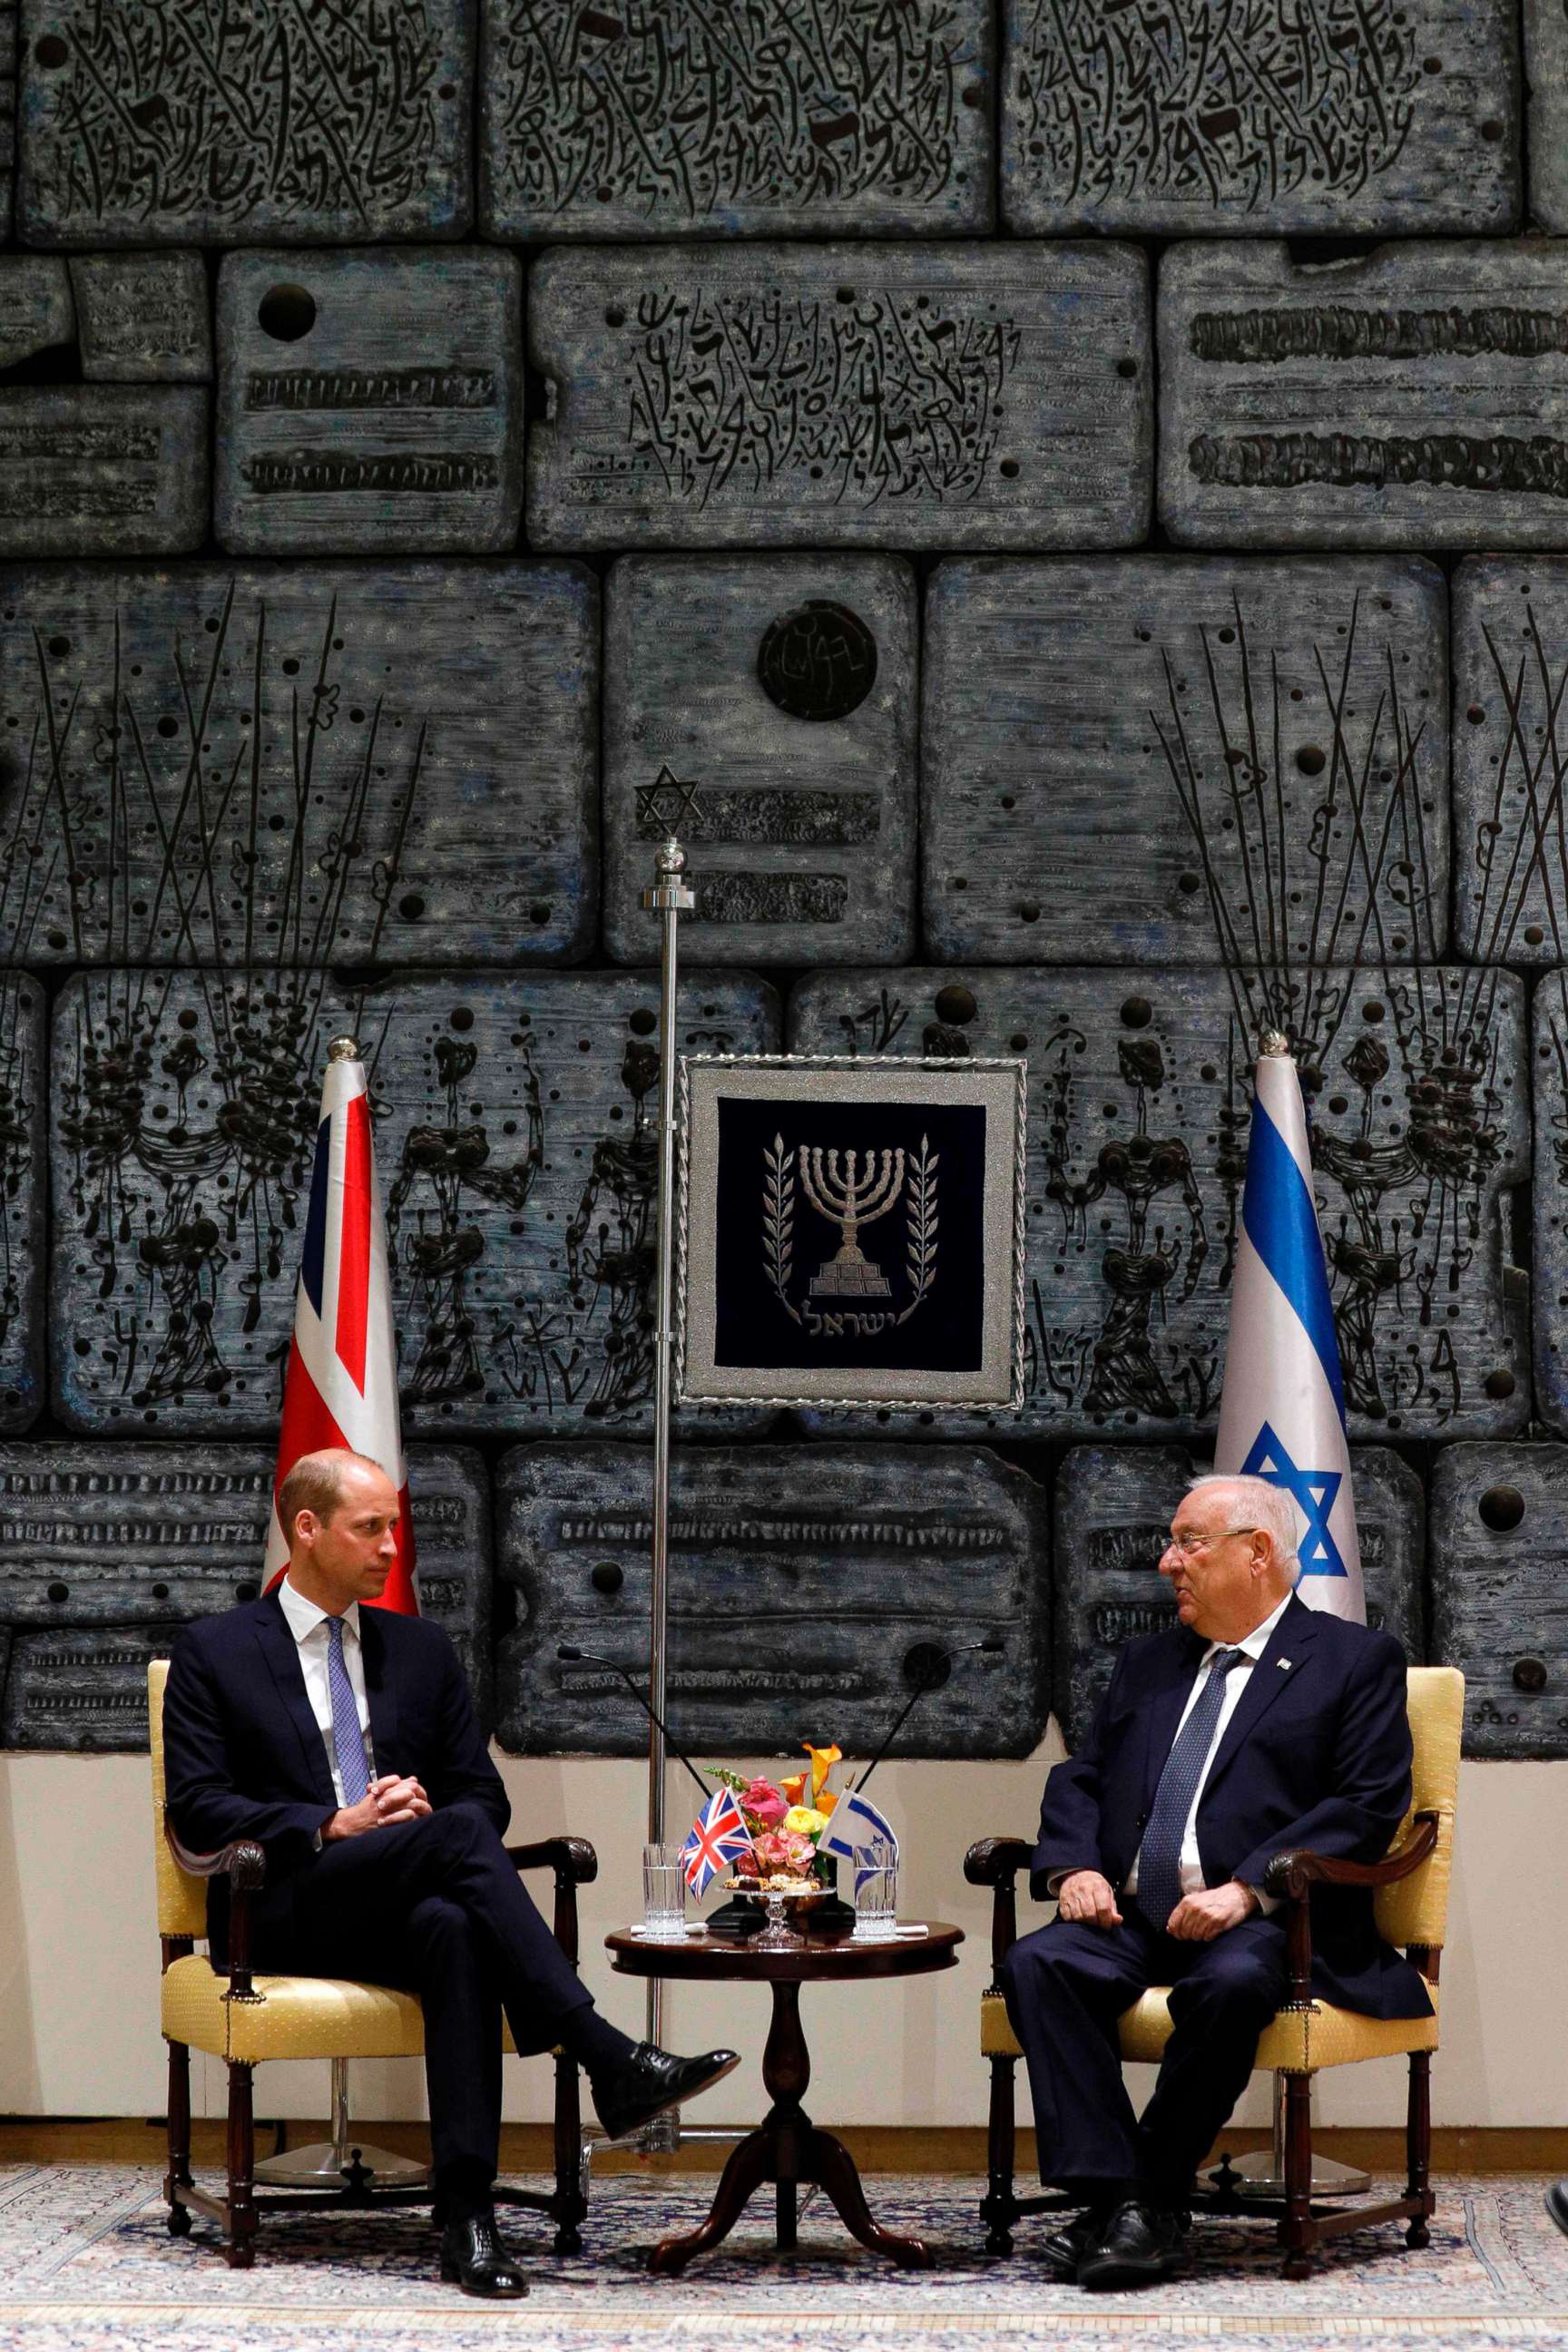 PHOTO: Prince William, the Duke of Cambridge and Israeli President Reuven Rivlin meet at the presidential compound in Jerusalem, June 26, 2018.